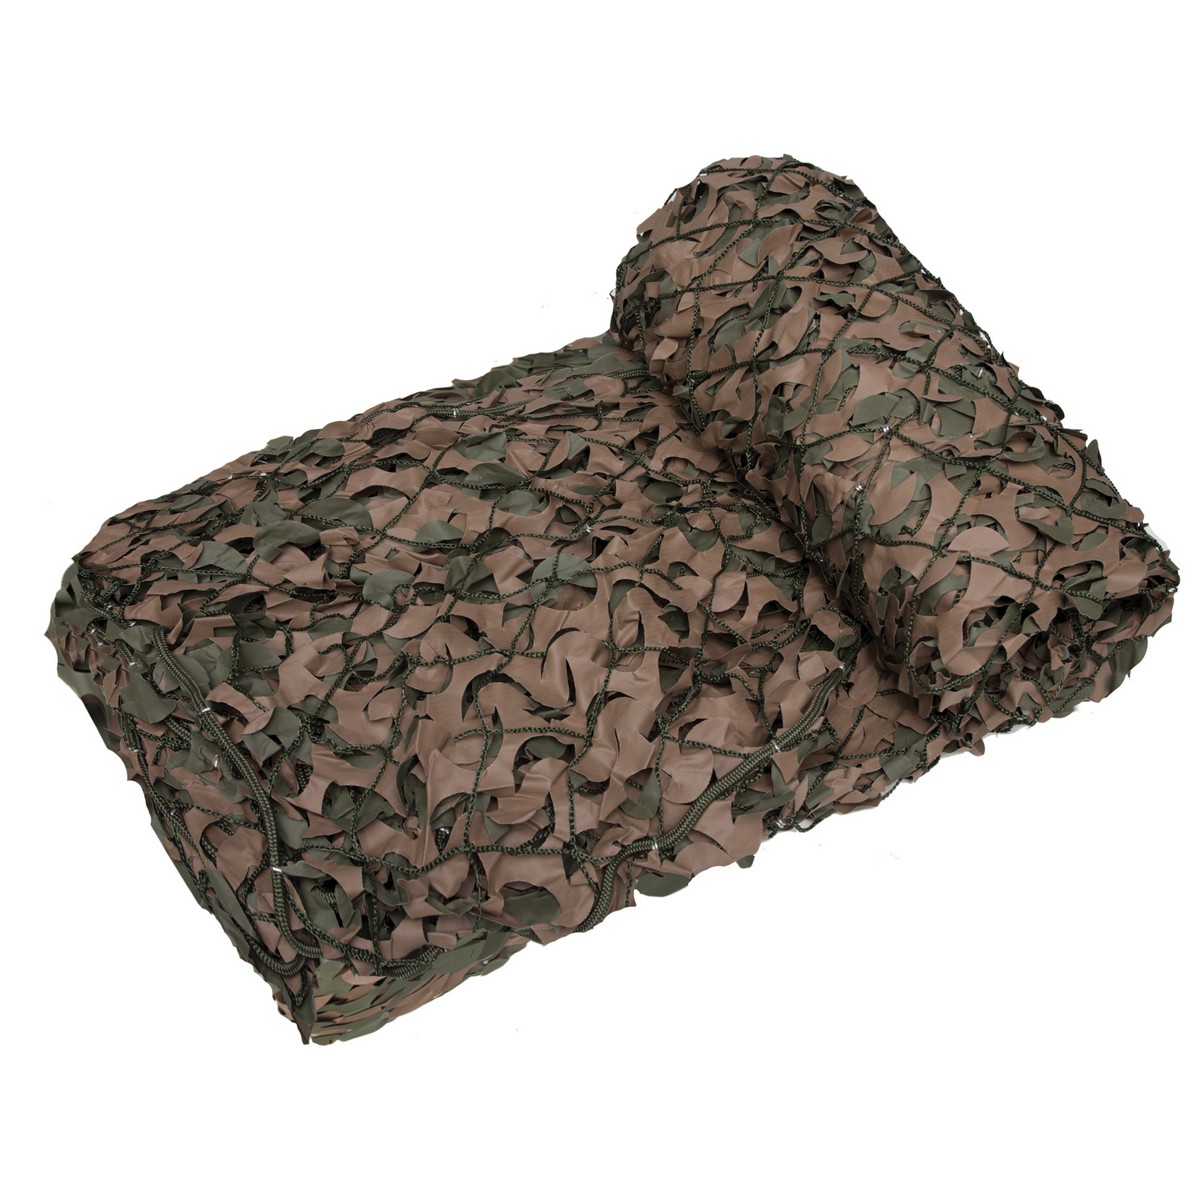 CamoSystems Basic Series Camouflage Military Net with Mesh Netting Attached